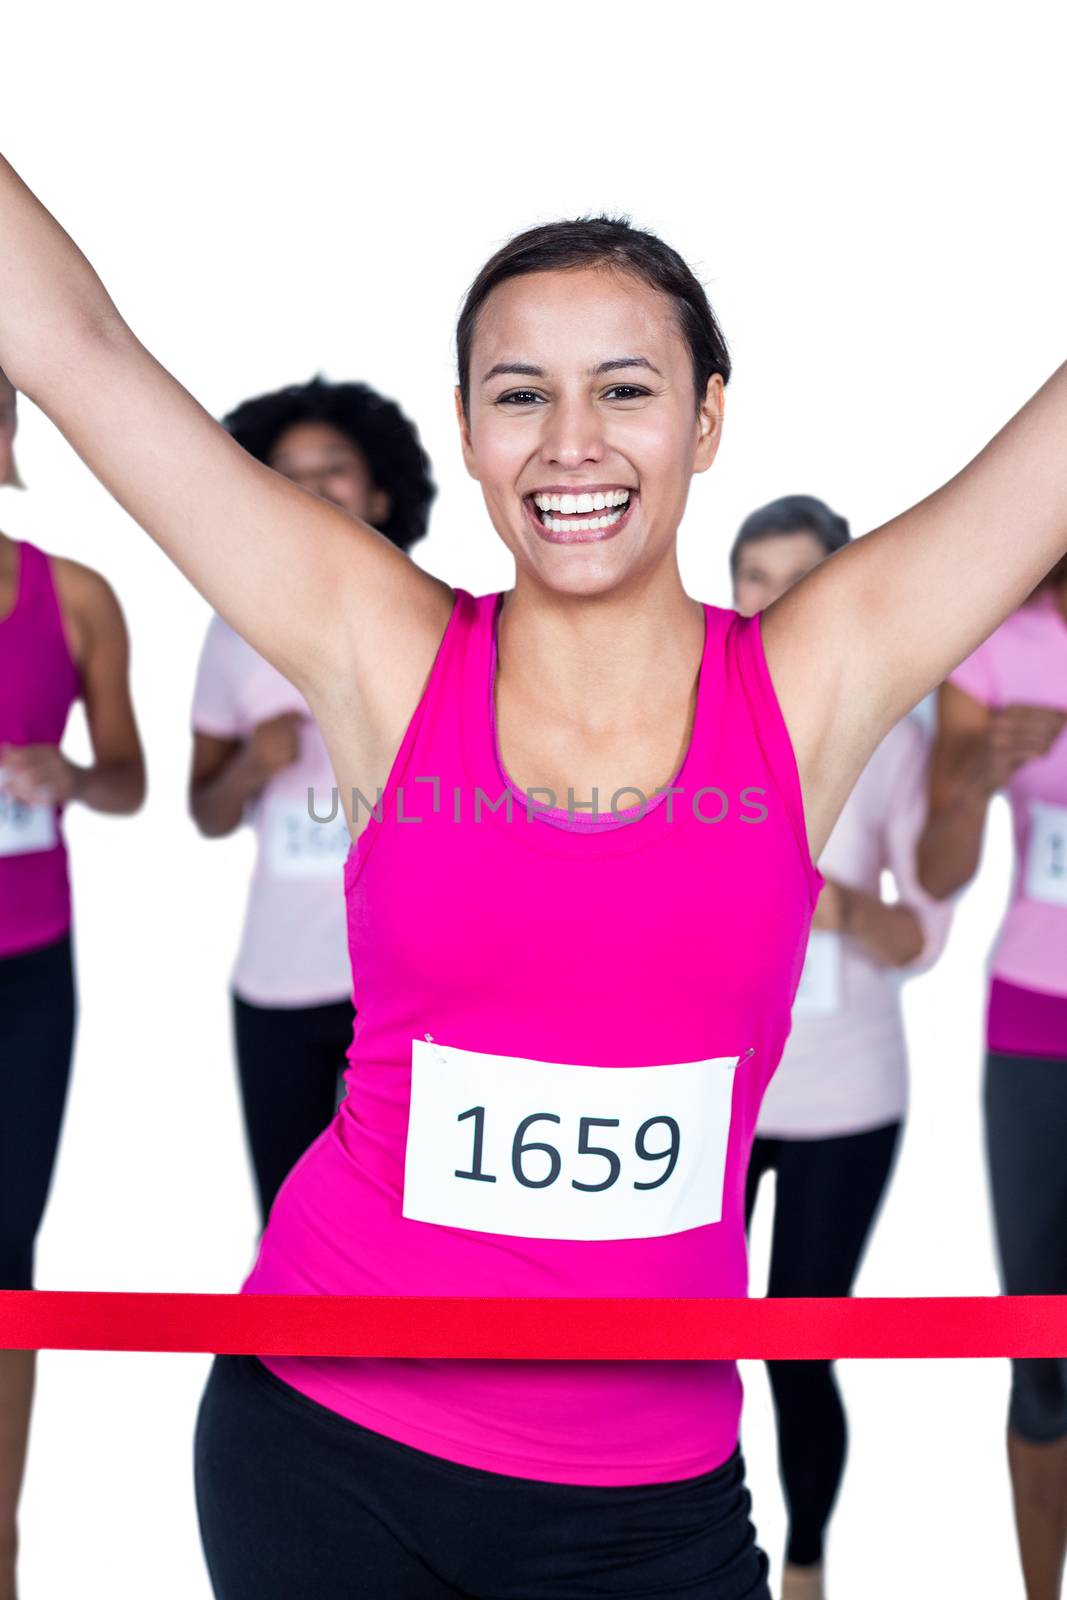 Portrait of cheerful winner athlete crossing finish line with arms raised against white background